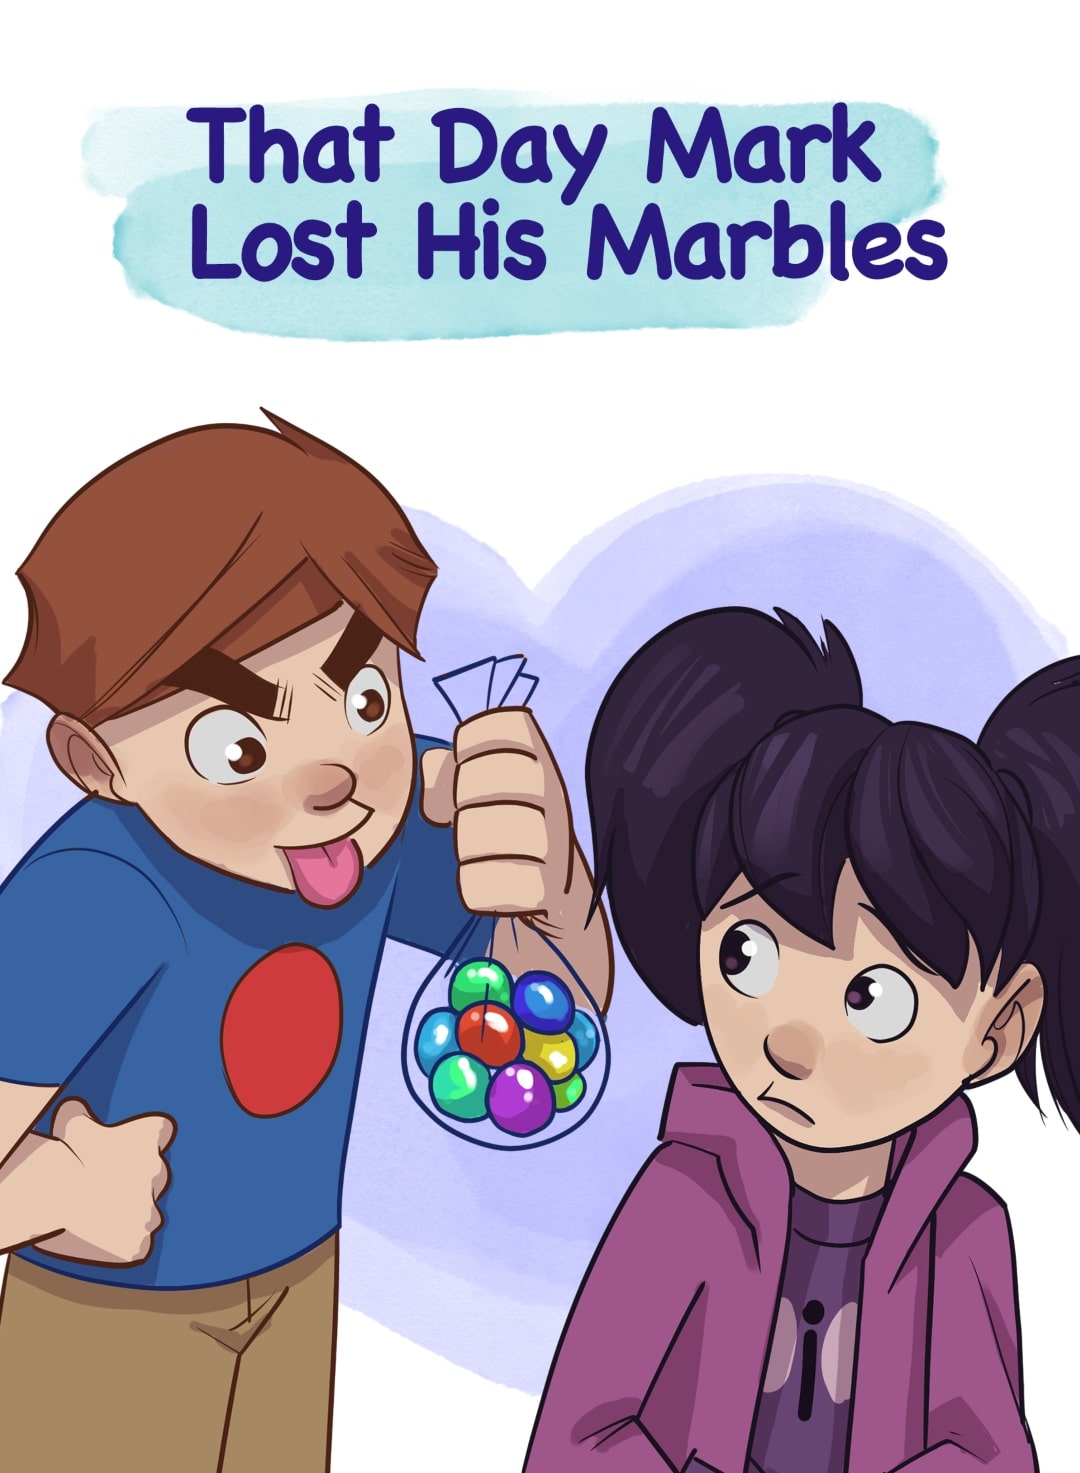 The Day Mark Lost His Marbles